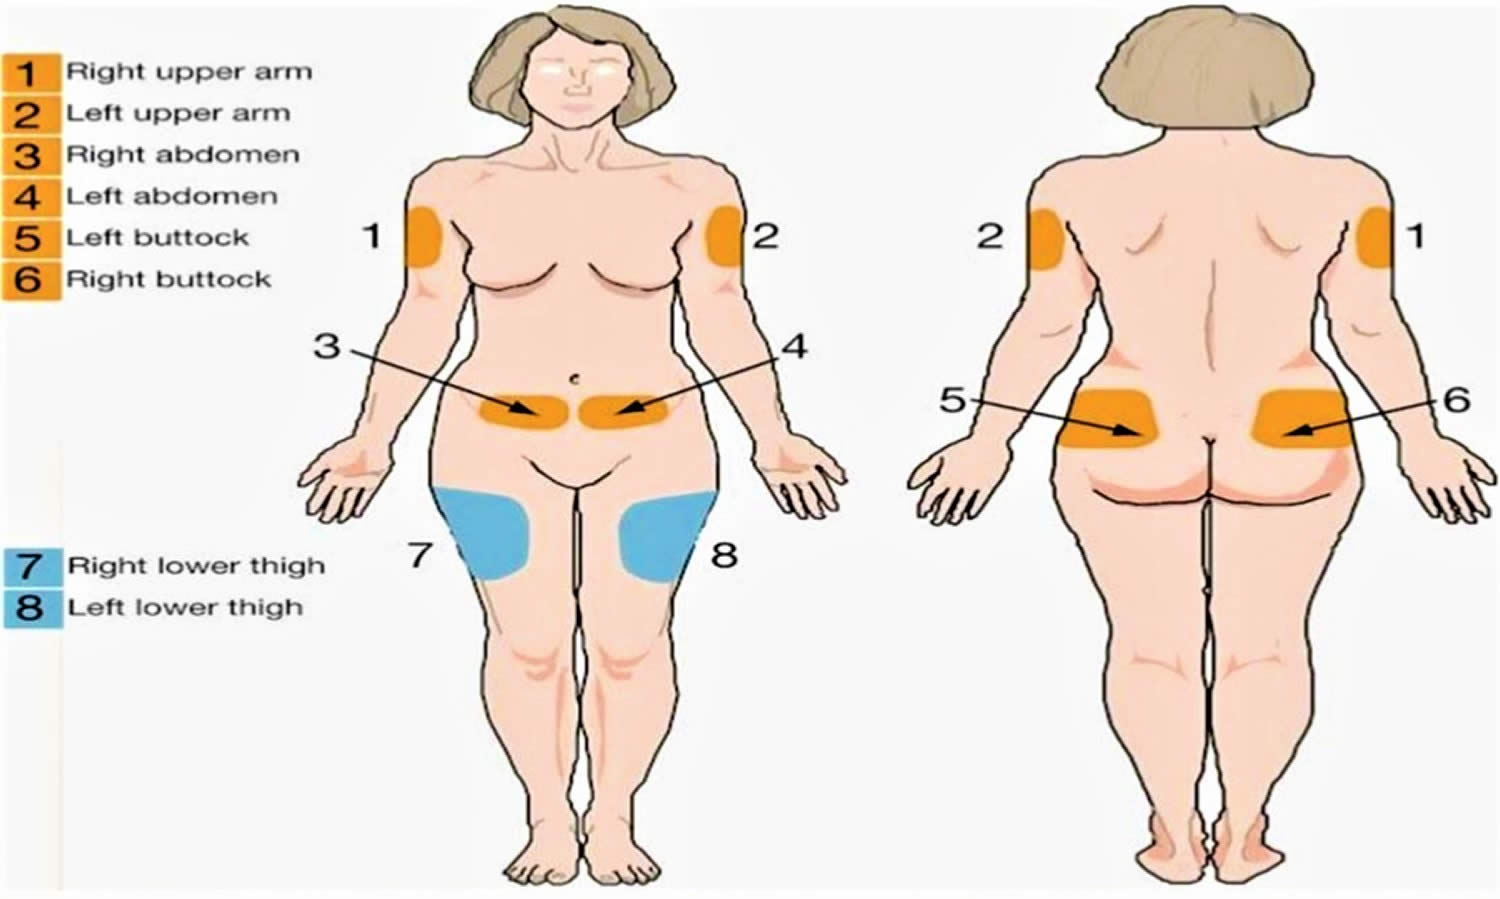 Subcutaneous injection sites